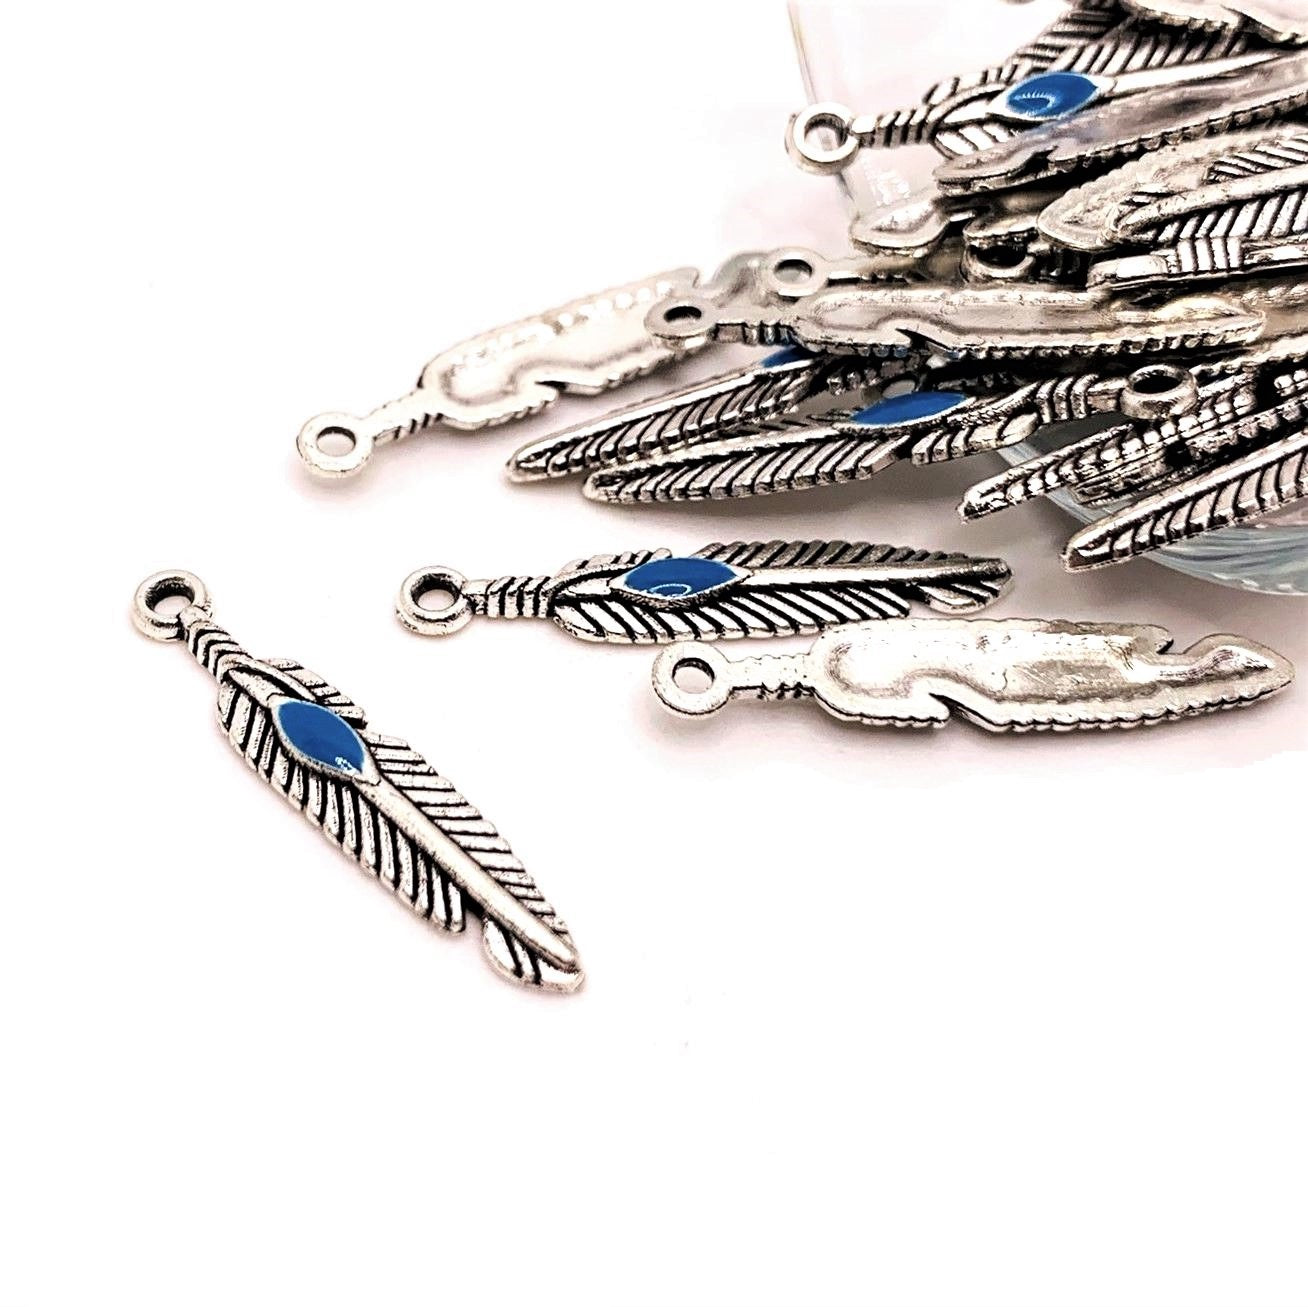 4, 20 or 50 Pieces: Silver Feather Charms with Blue Center